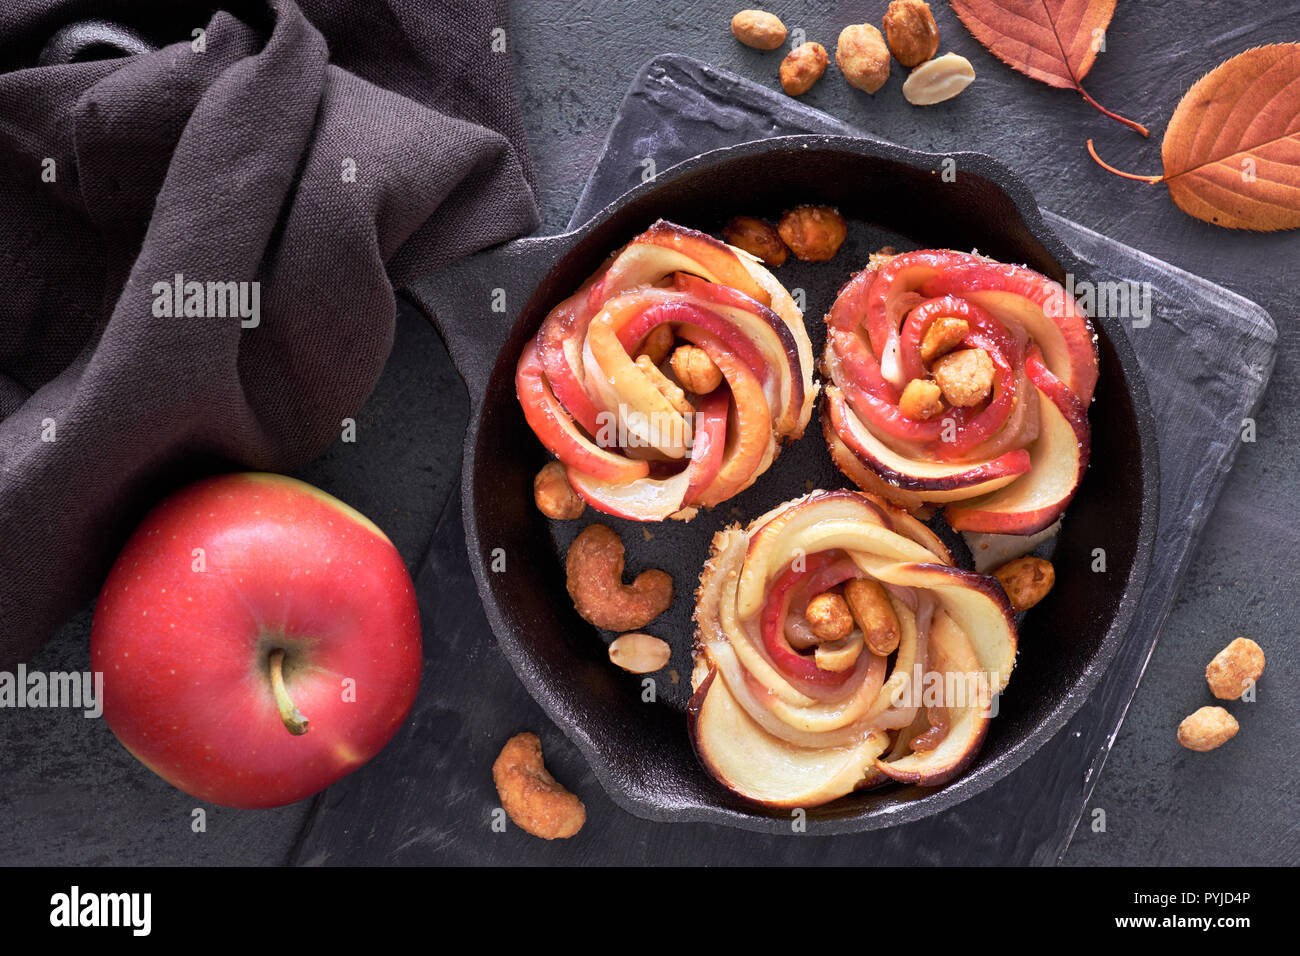 Three puff pastries with rose shaped apple slices baked in cast iron skillet and a fersh red apple. Top lay on dark background with linen towel and ca Stock Photo